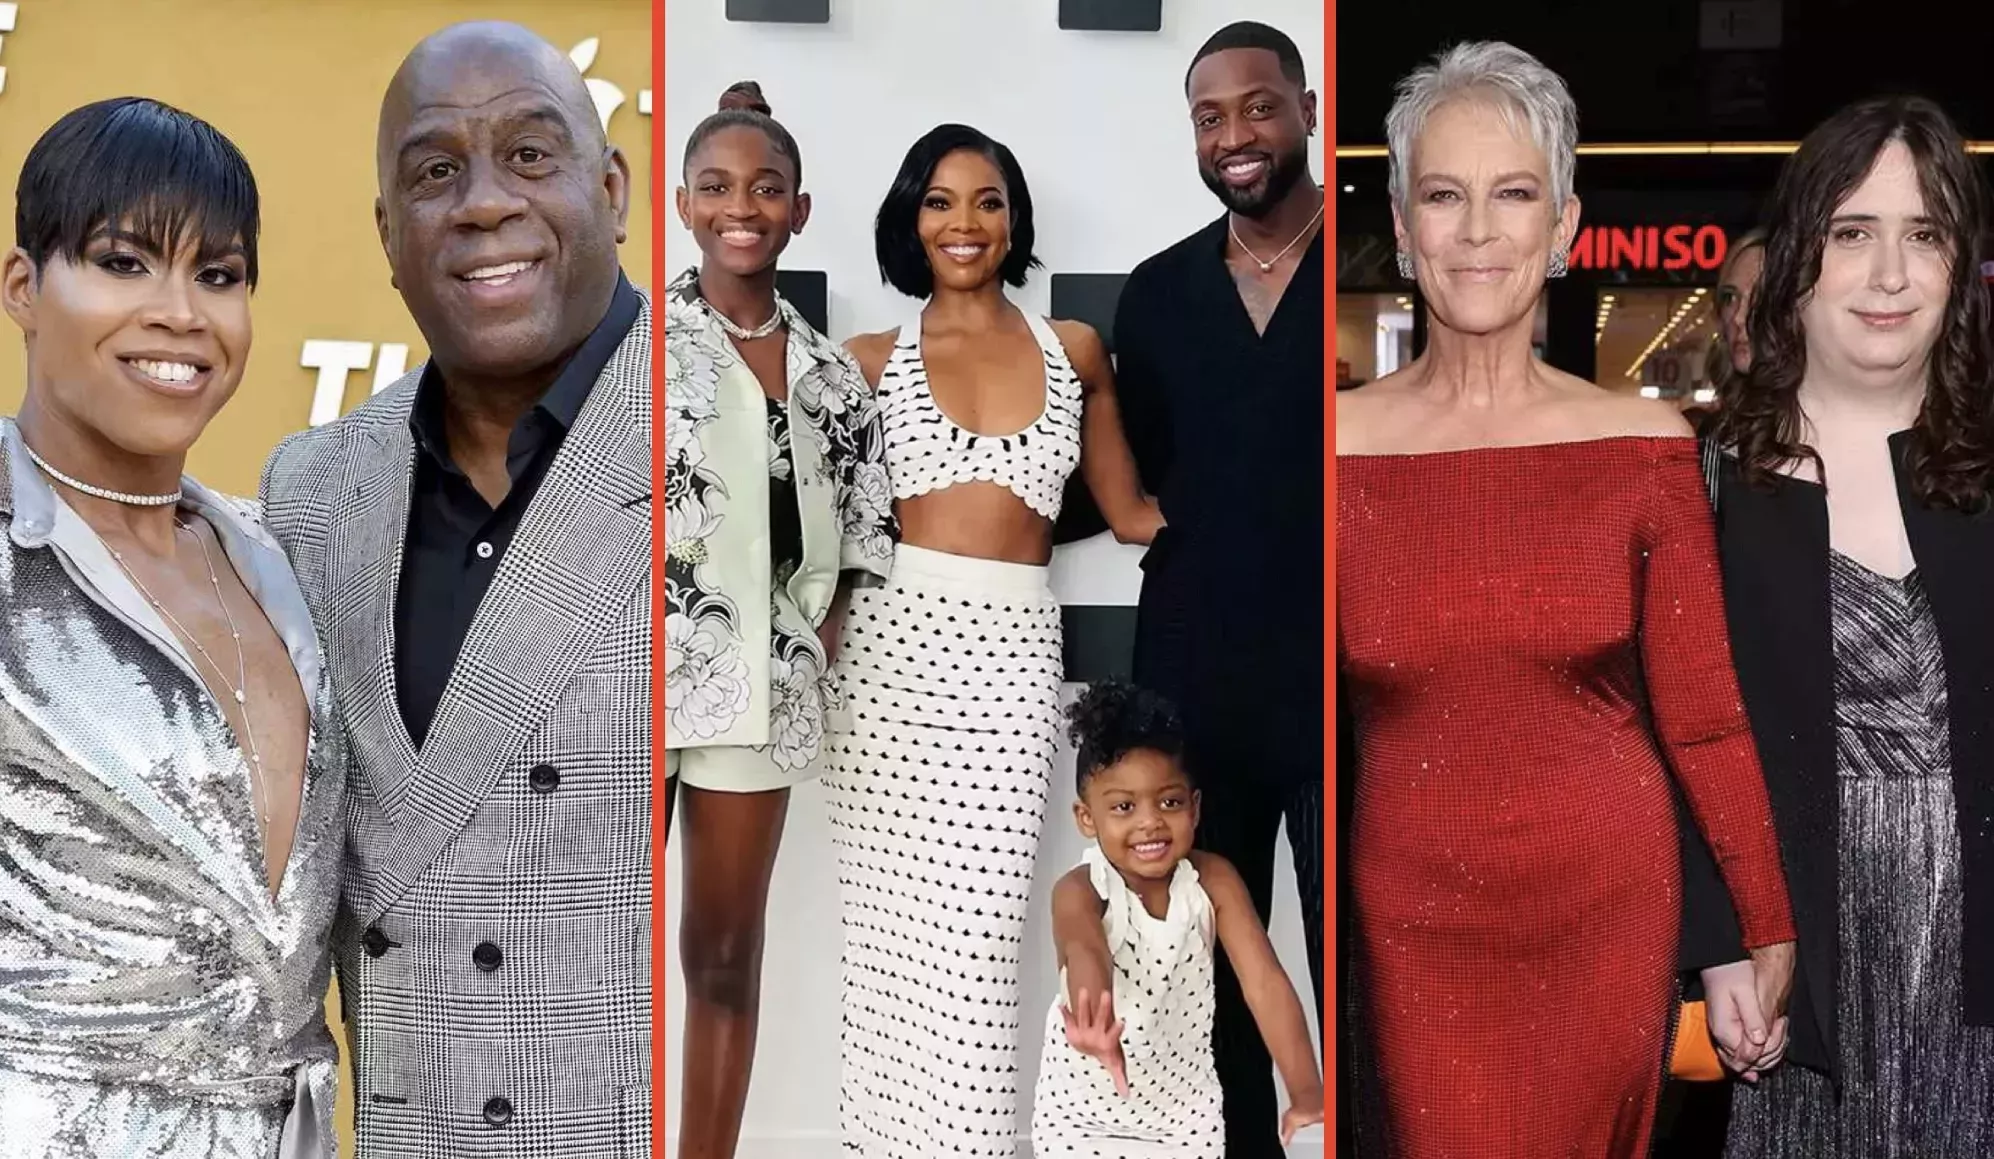 Magic Johnson with son EJ, Zaya Wade with parents Gabrielle Union and Dwyane Wade, and Jamie Lee Curtis with daughter Ruby Guest.